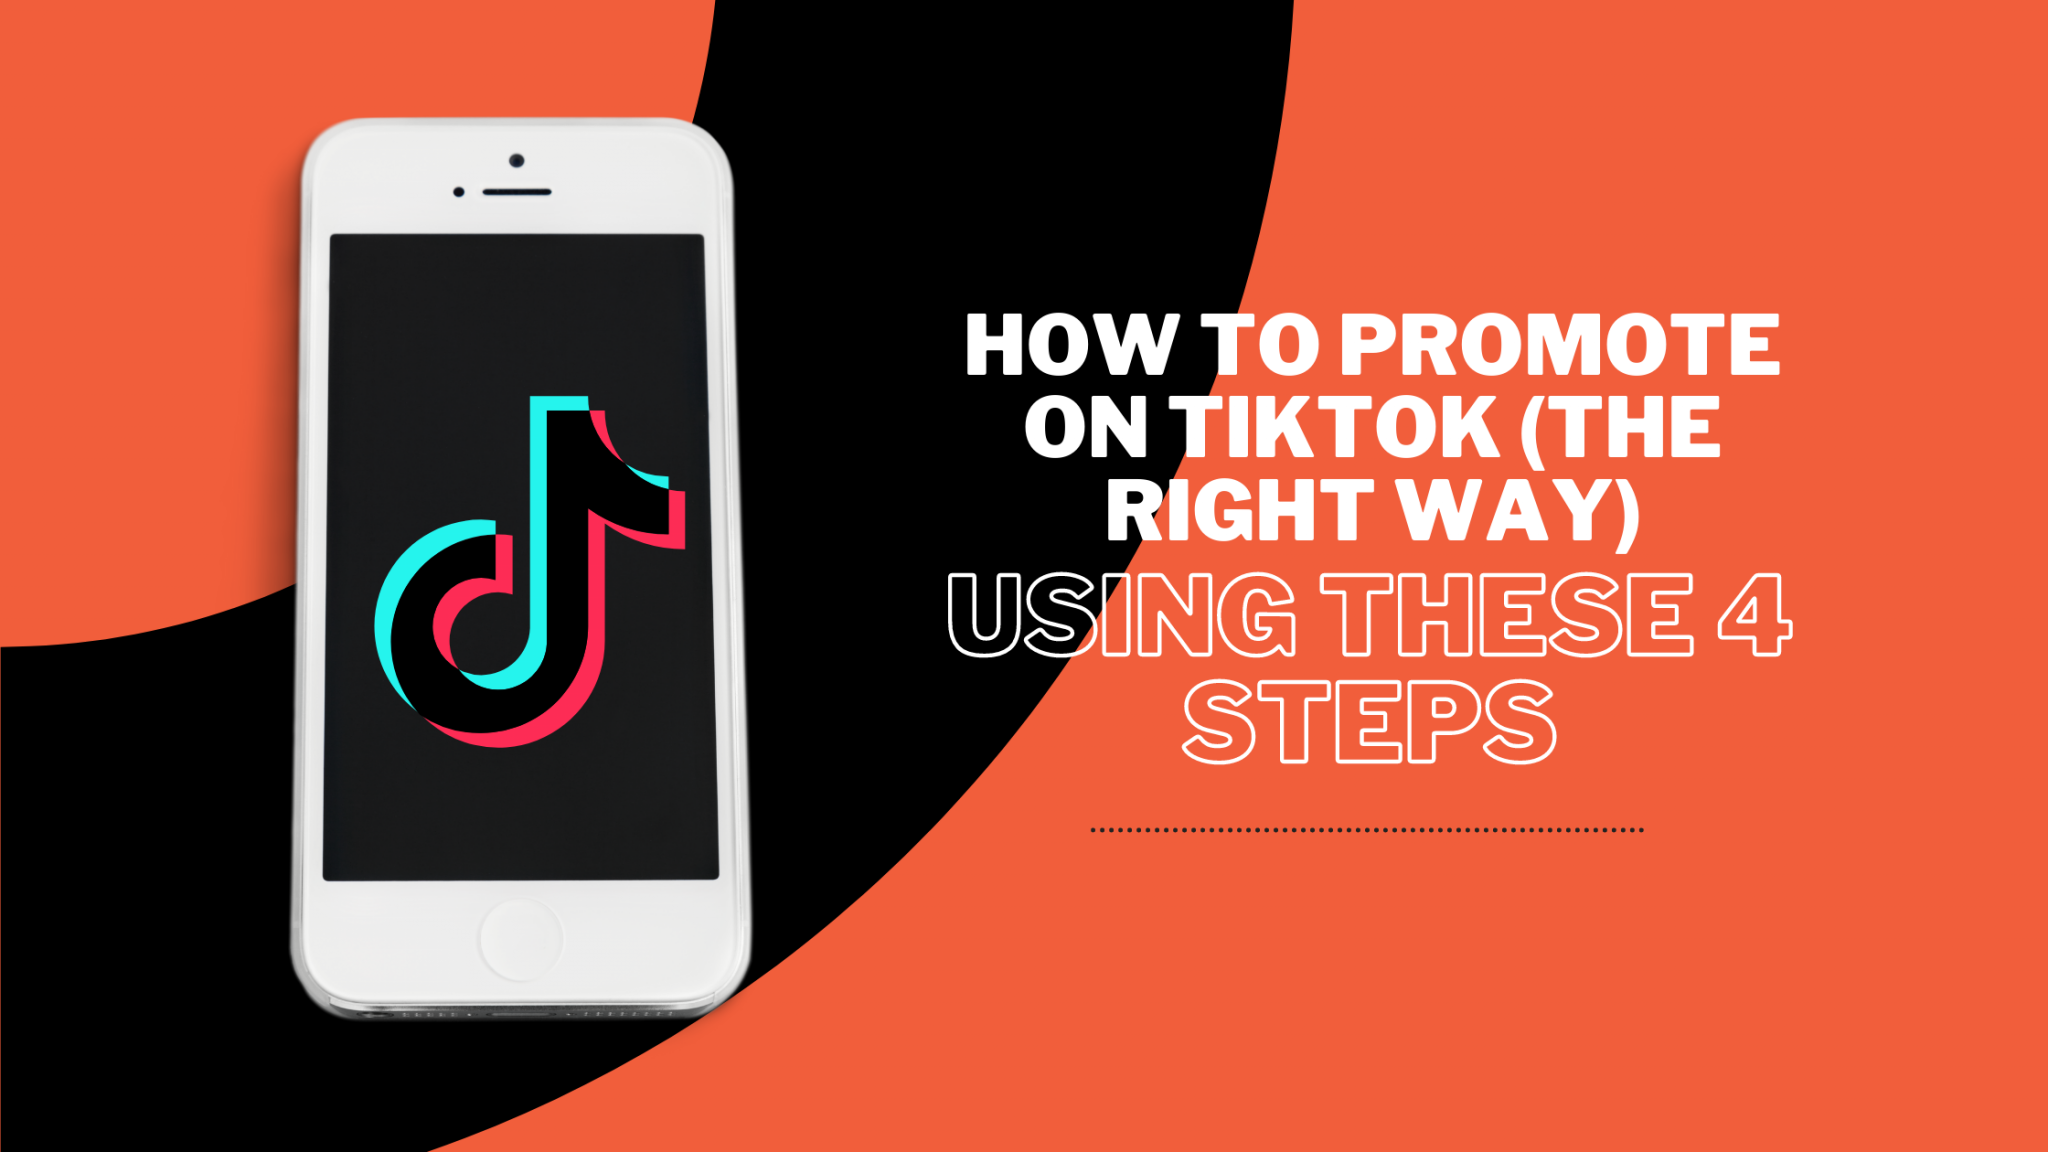 How To Promote On TikTok (The Right Way) Using These 4 Steps